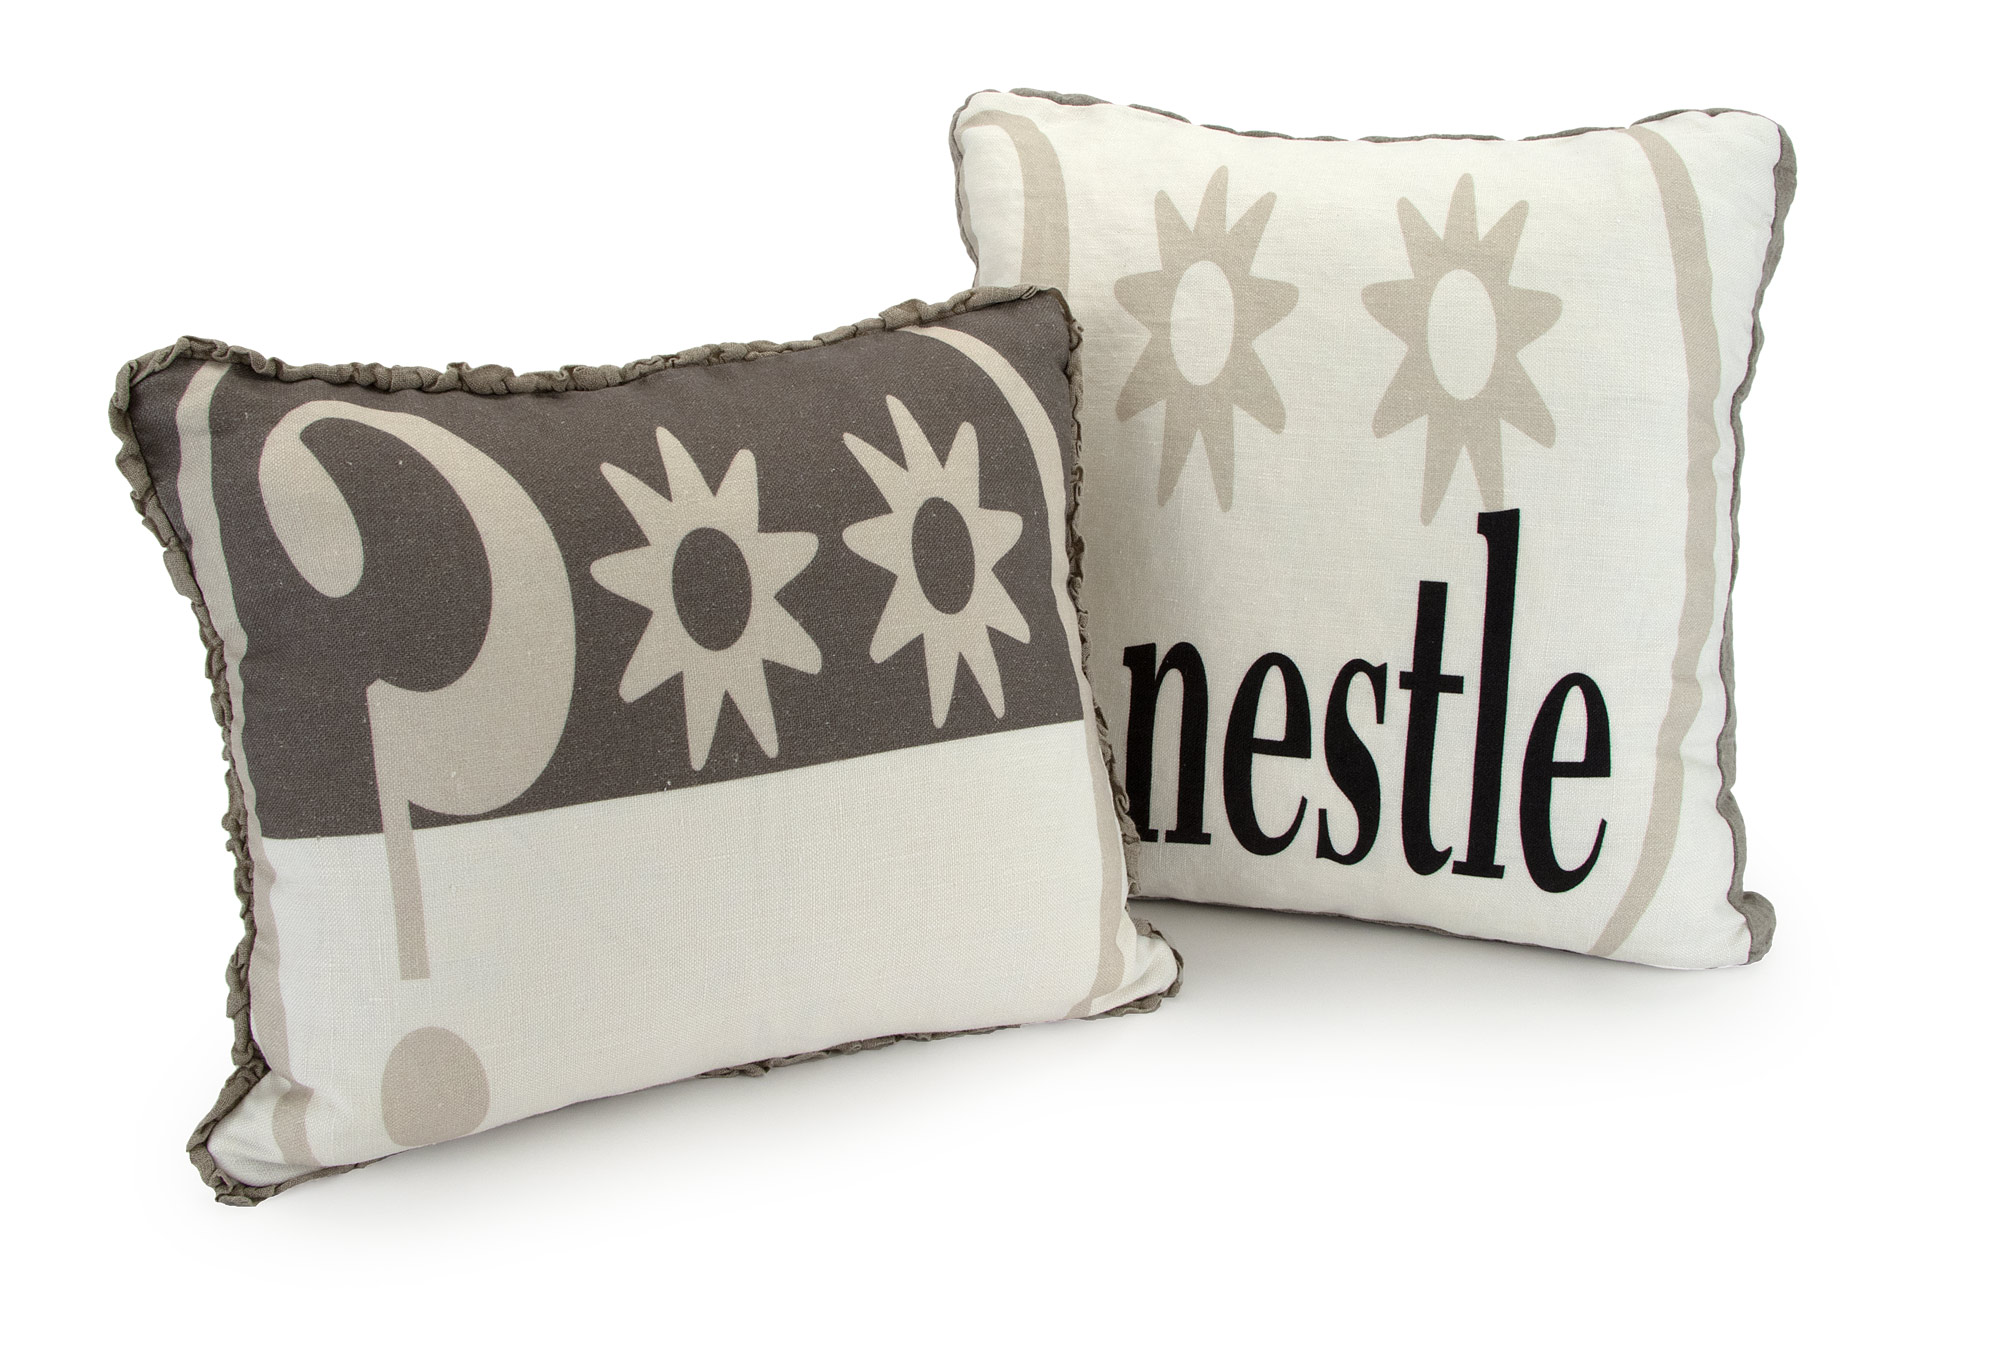 Nestle and Star Pillows